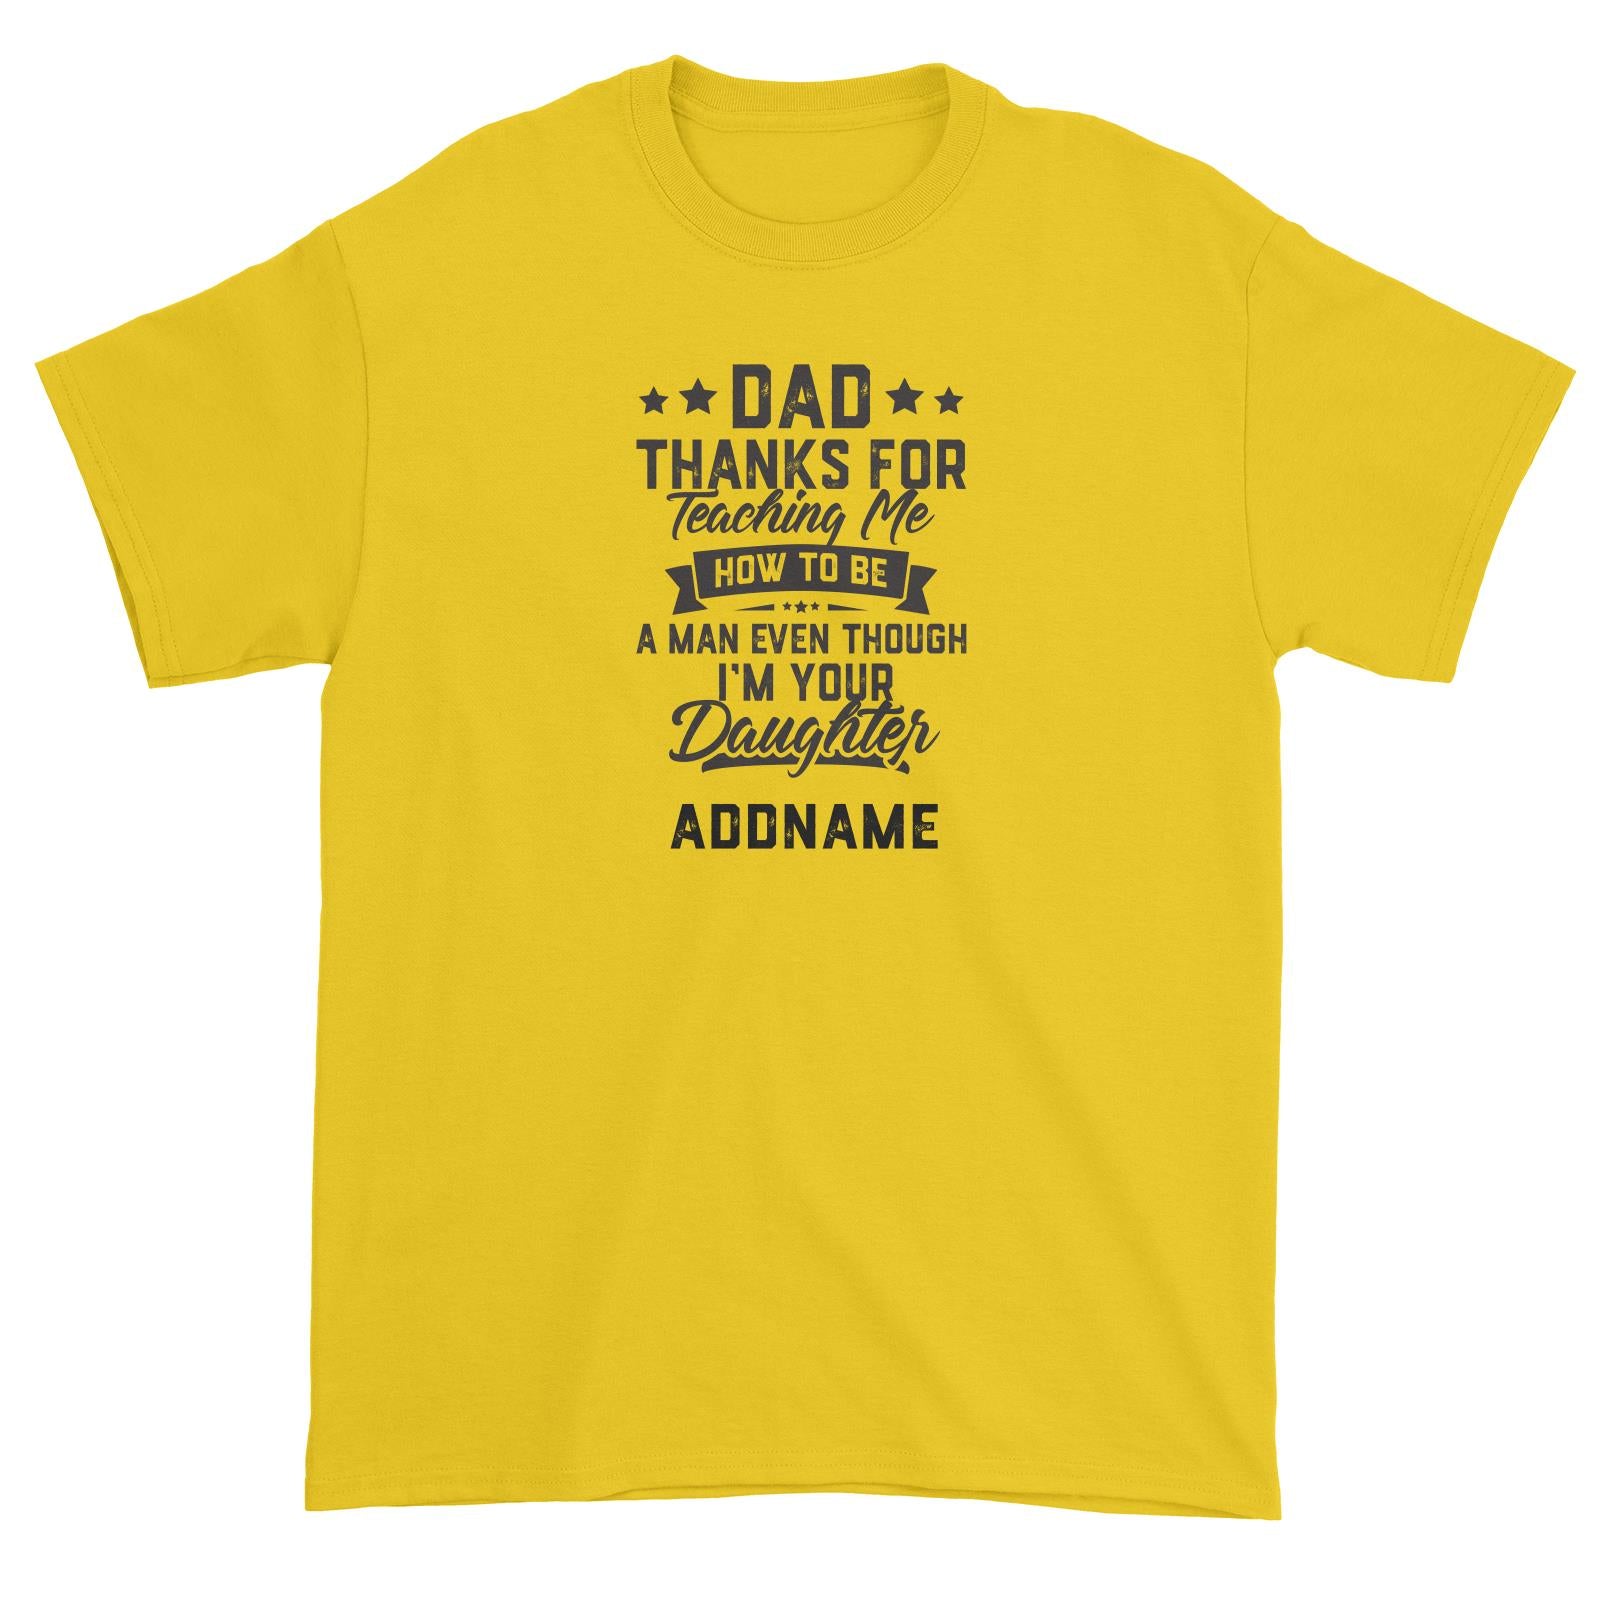 Dad Thanks For Teaching Me Addname Unisex T-Shirt